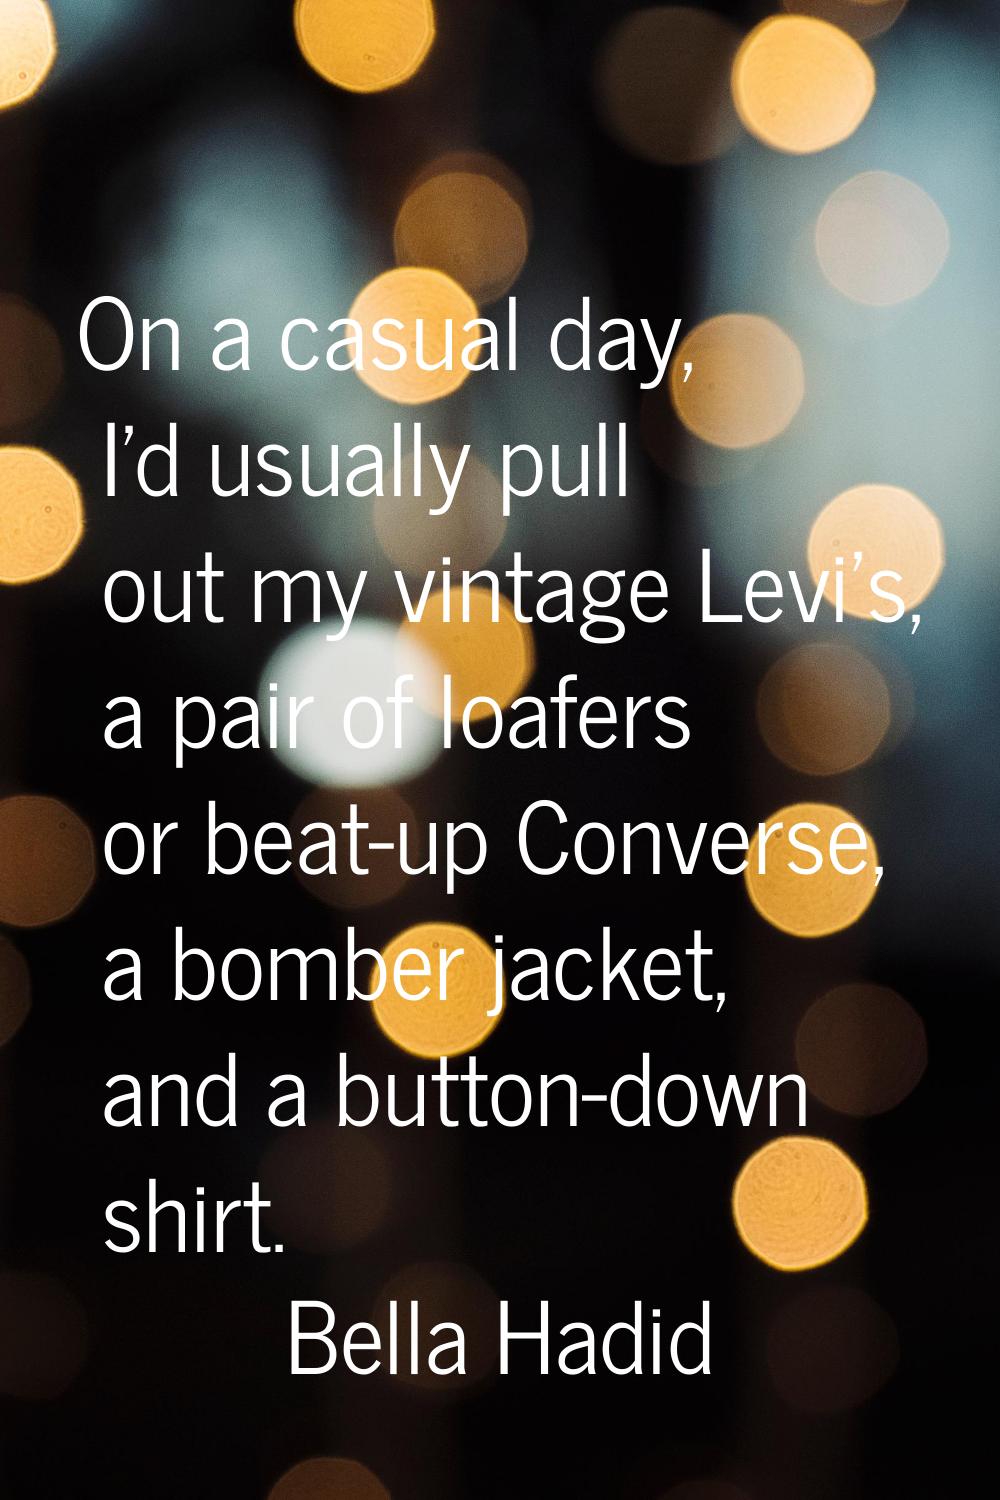 On a casual day, I'd usually pull out my vintage Levi's, a pair of loafers or beat-up Converse, a b